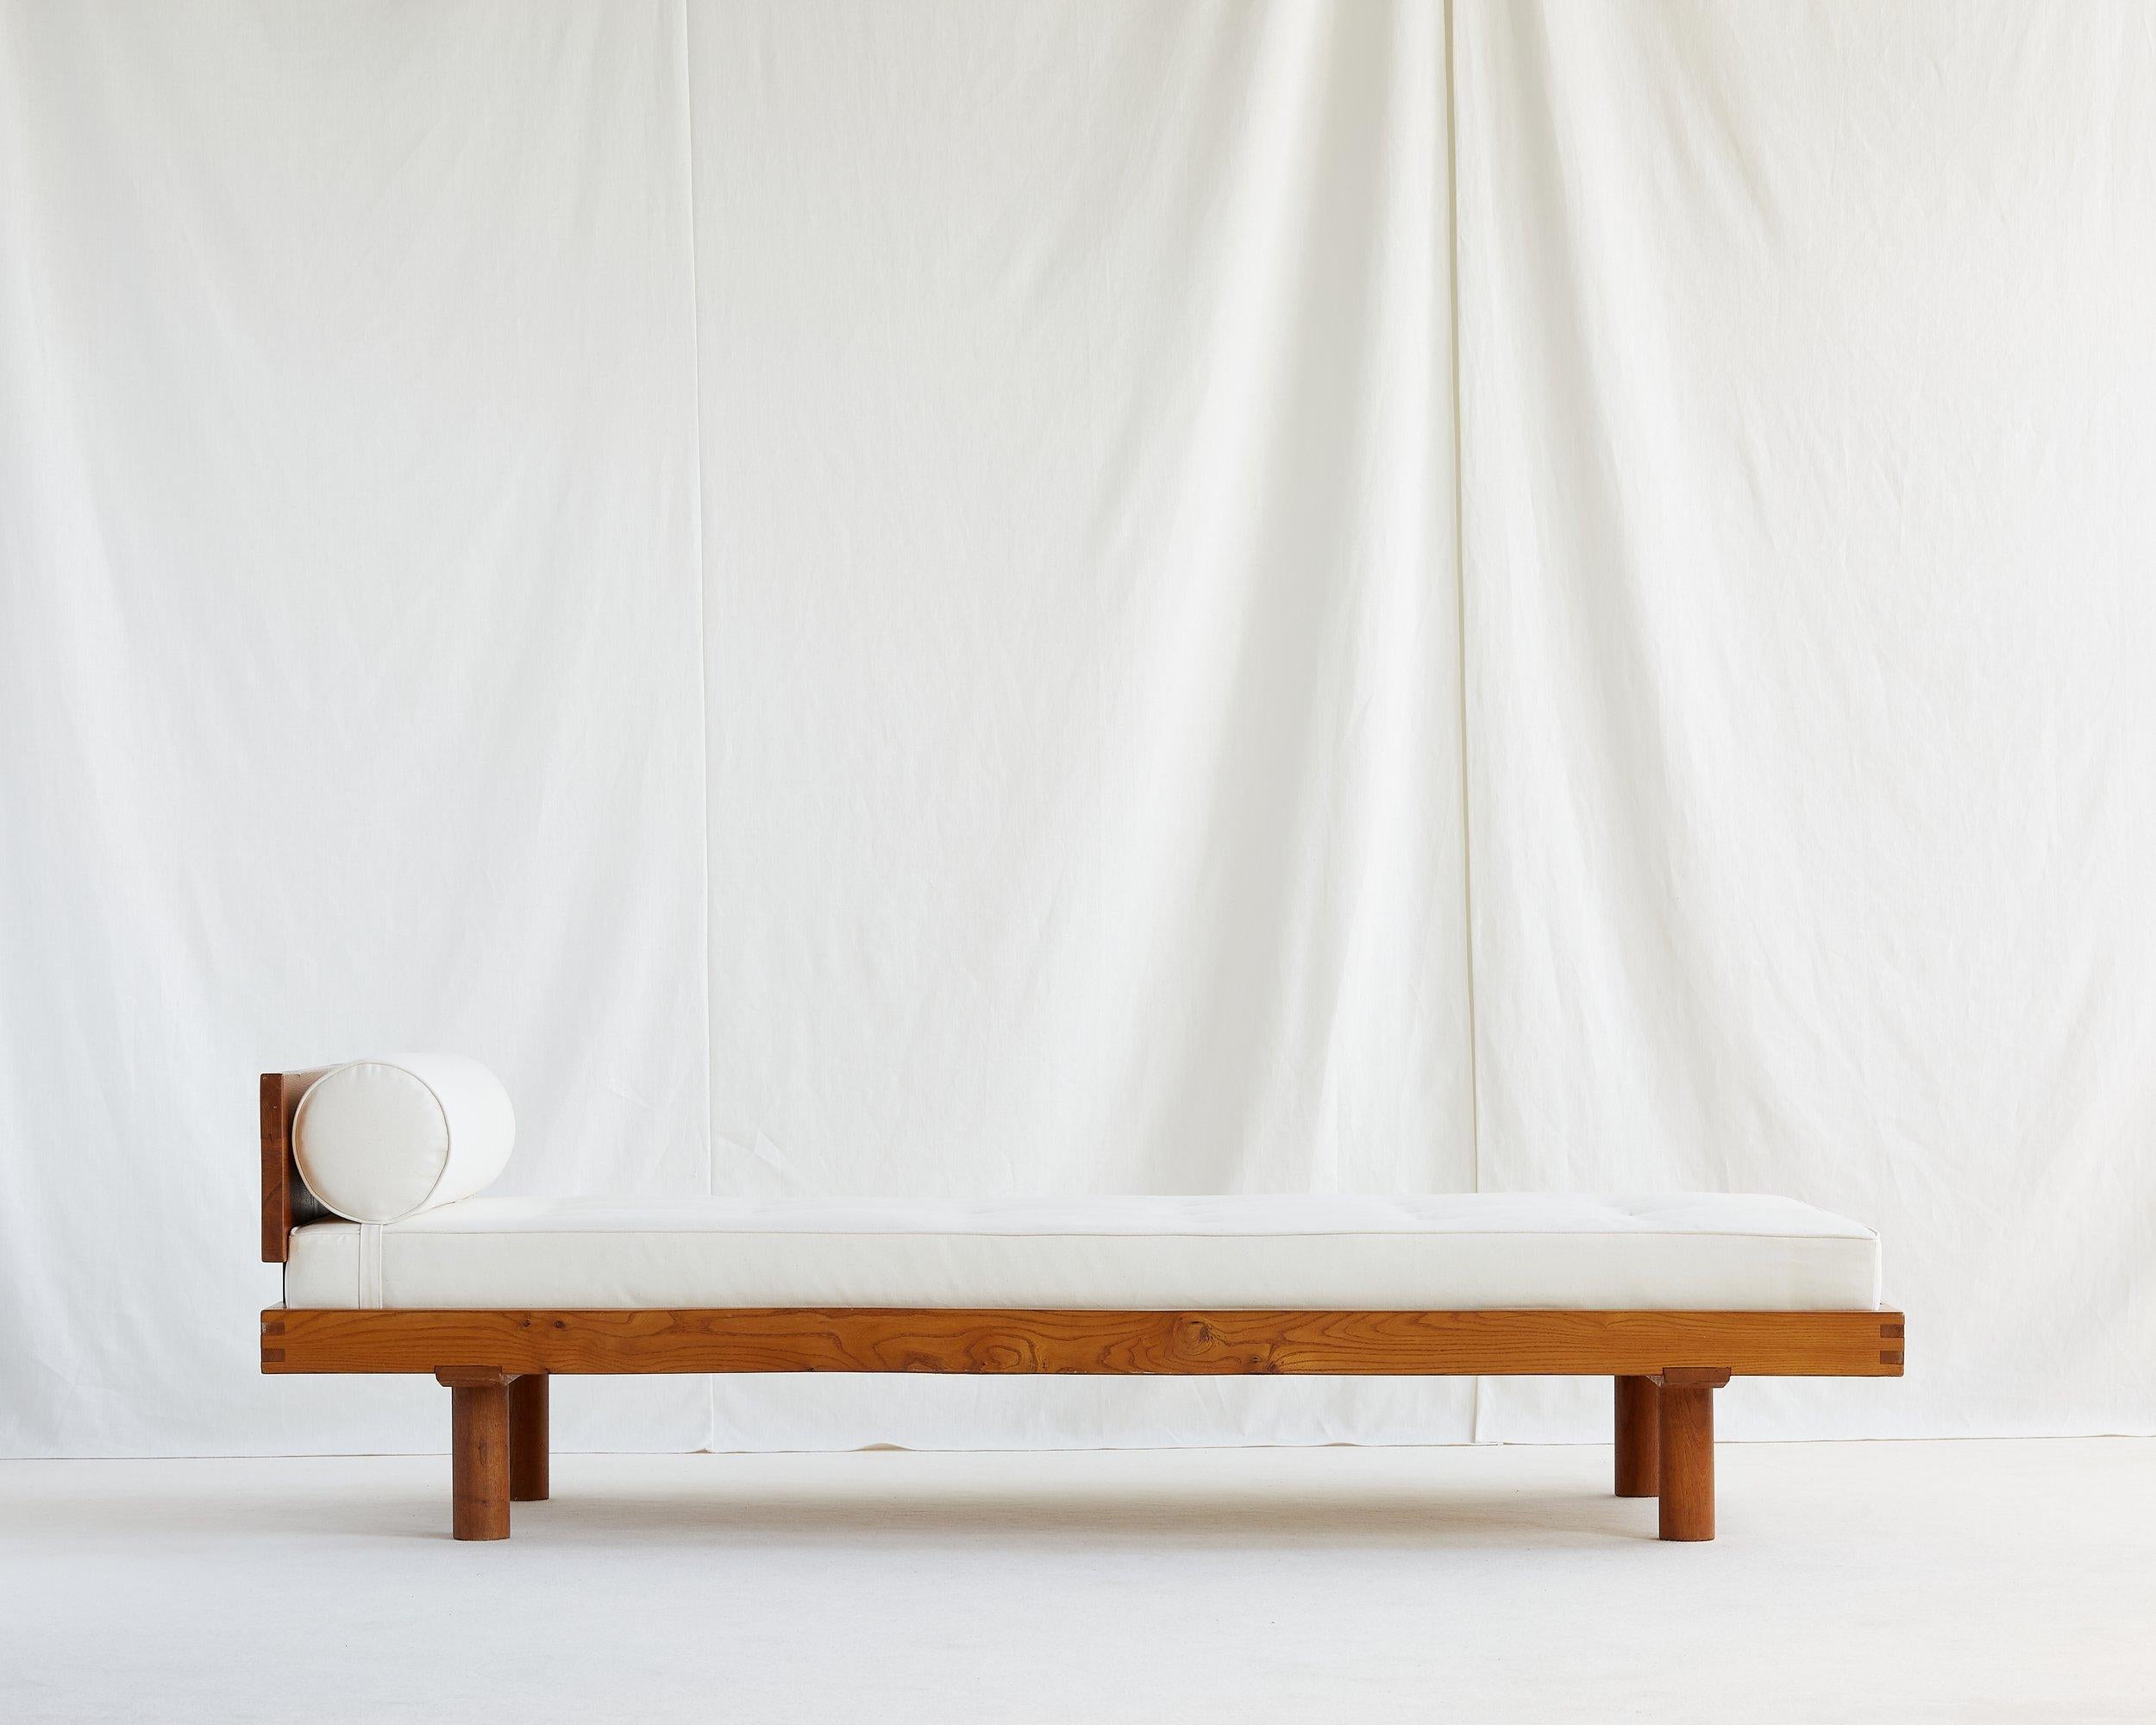 Rare Pierre Chapo daybed in French elm with removable headboard and footboard.

The head board and footboard are attached to two steel sleeves that insert easily into the frame. This allows for flexibility as it could have both pieces removed to